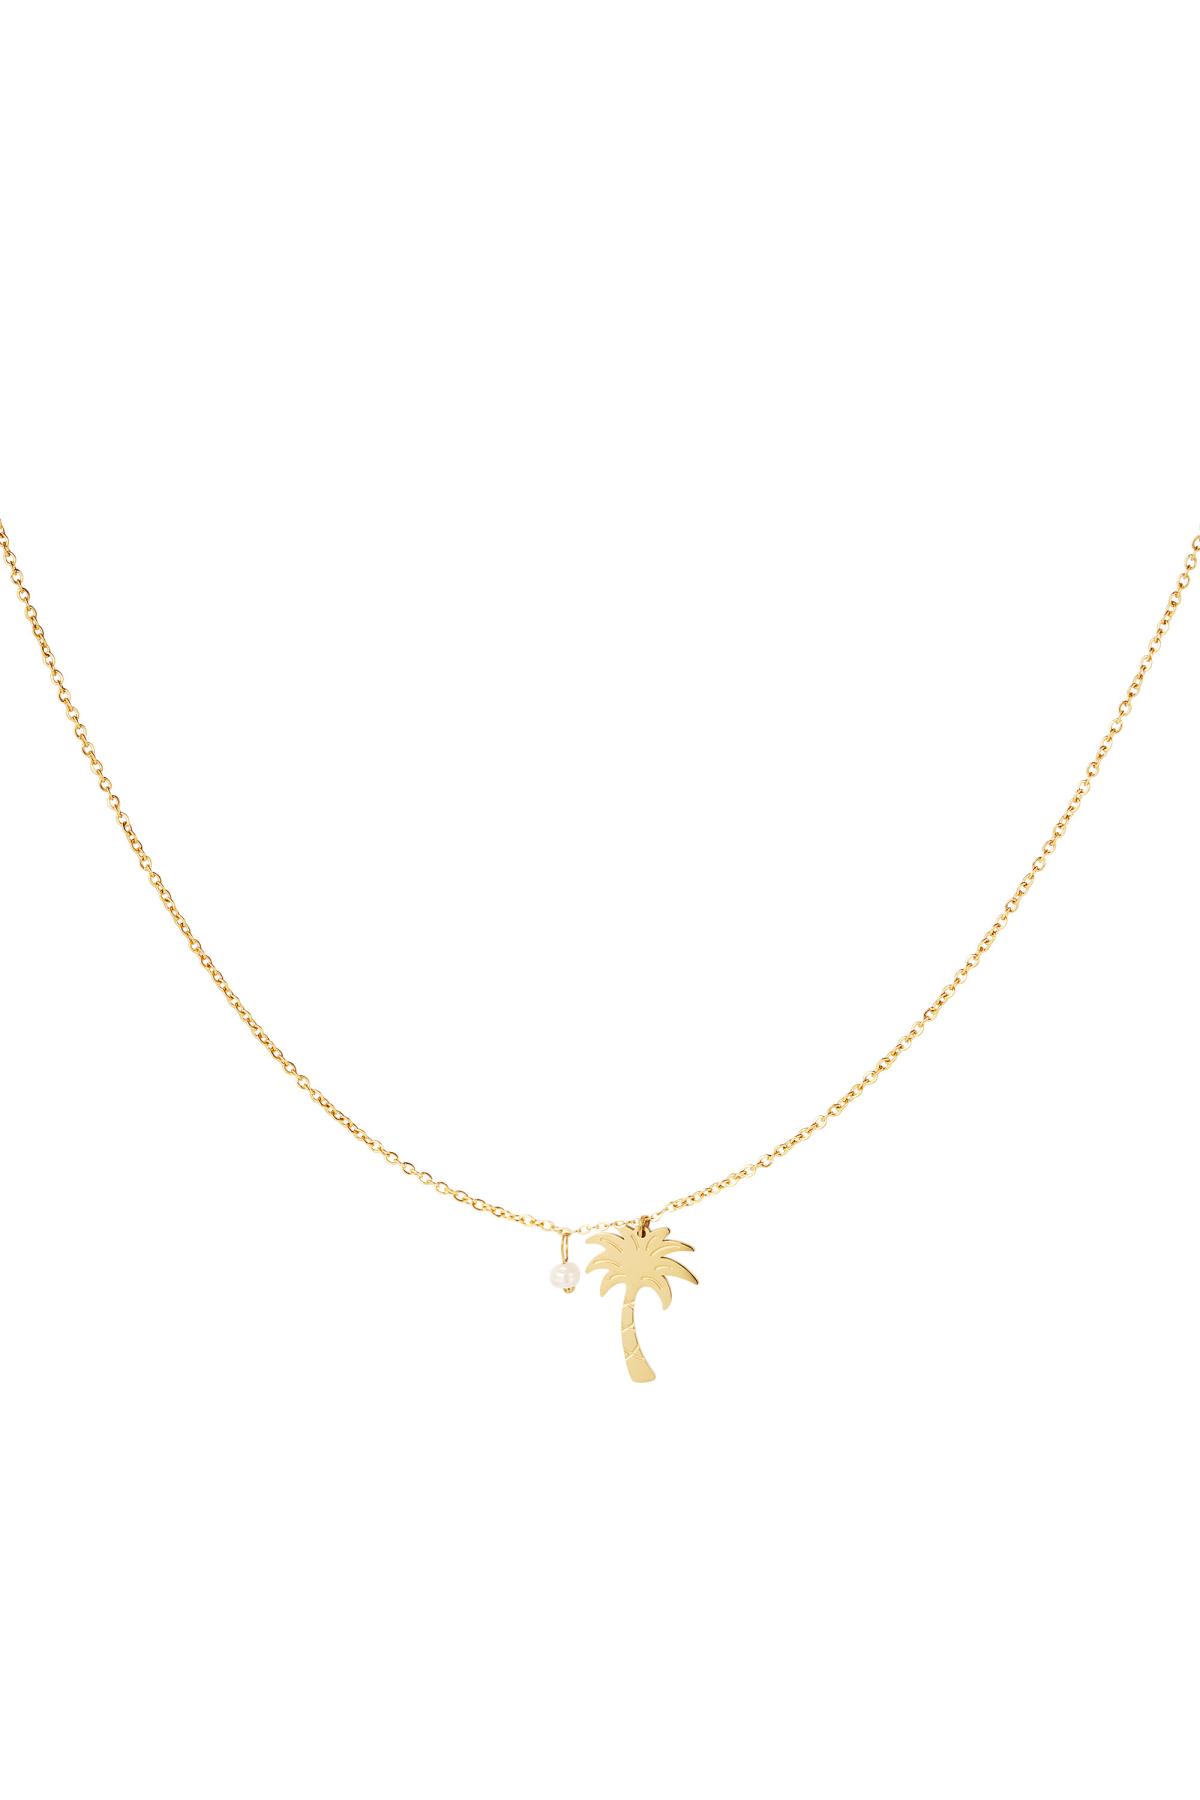 Necklace palm tree - Beach collection Gold Stainless Steel